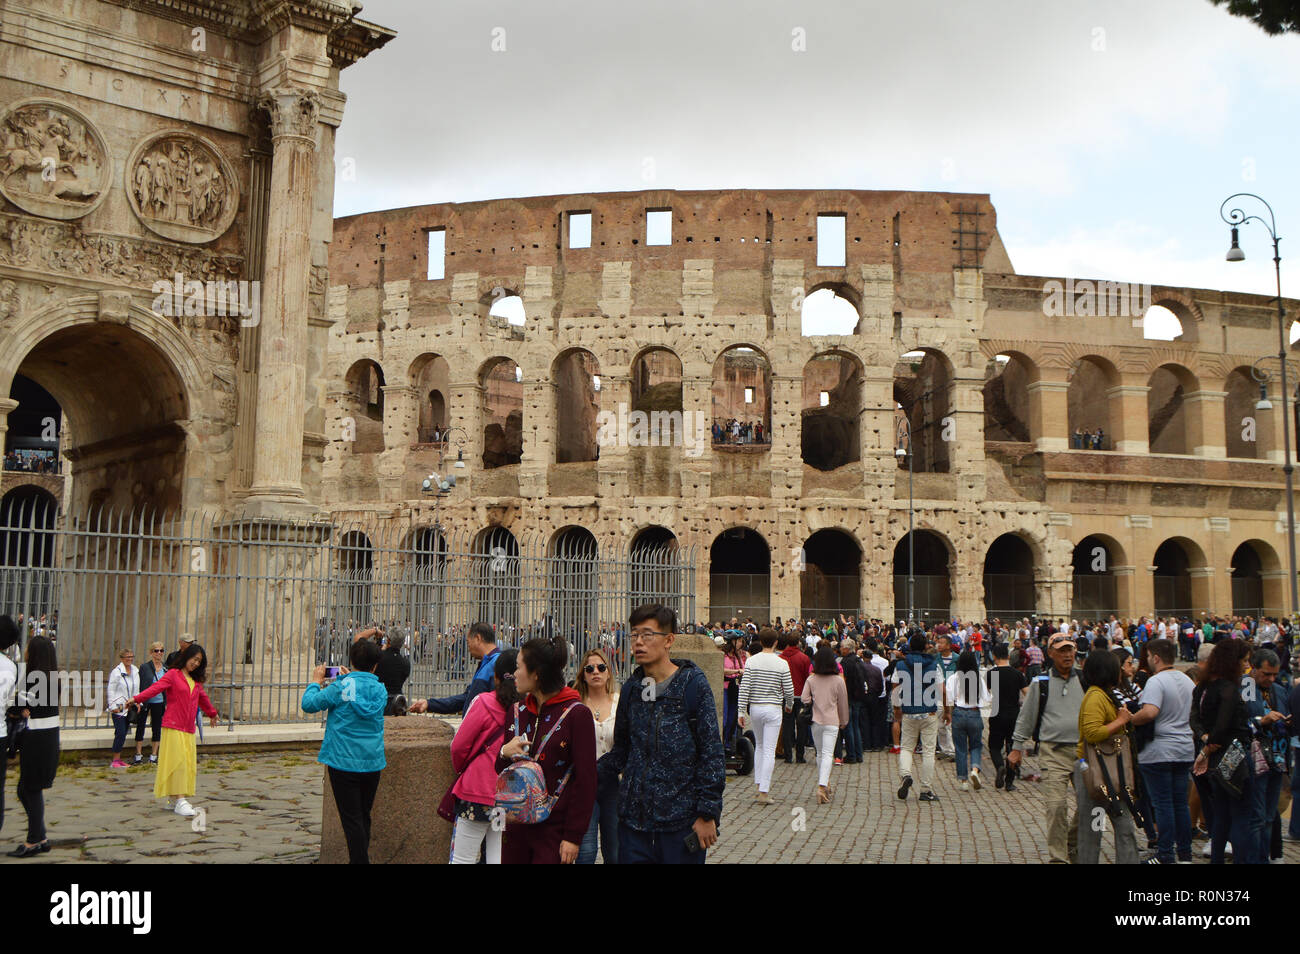 Multinational crowd of tourists in front of the Roman Colosseum, Rome, Italy October 7, 2018 Stock Photo